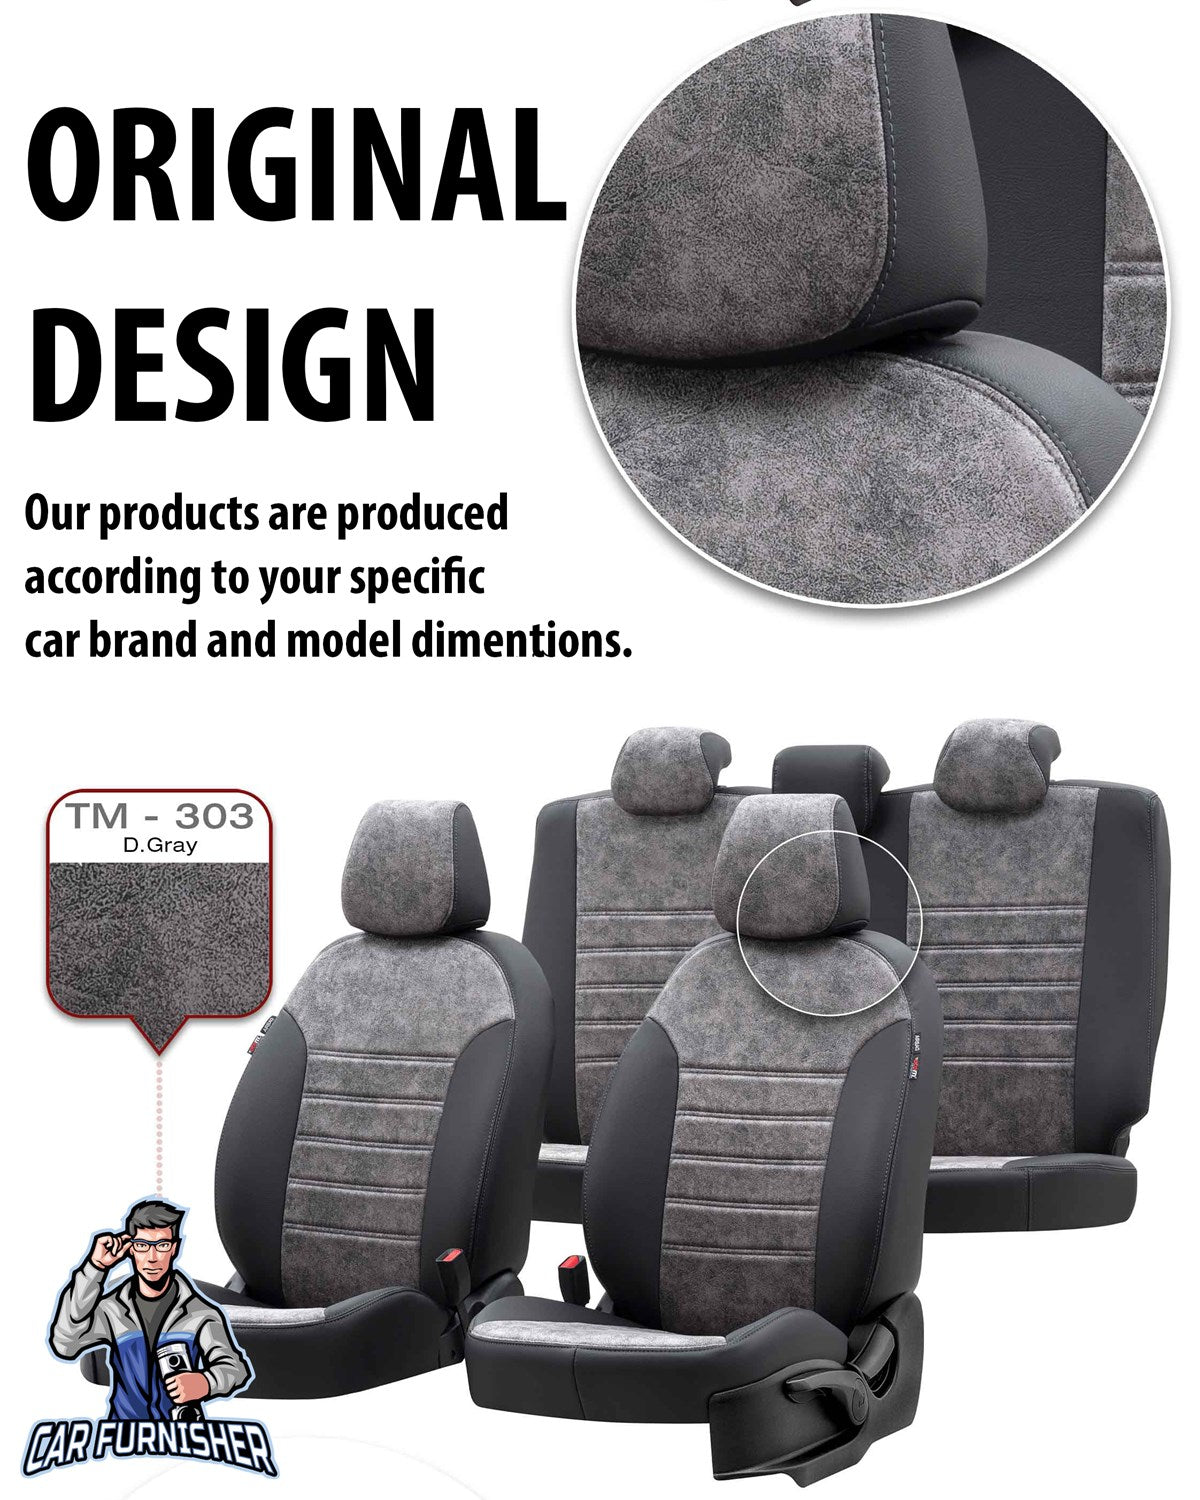 Volvo XC60 Seat Cover Milano Suede Design Burgundy Leather & Suede Fabric